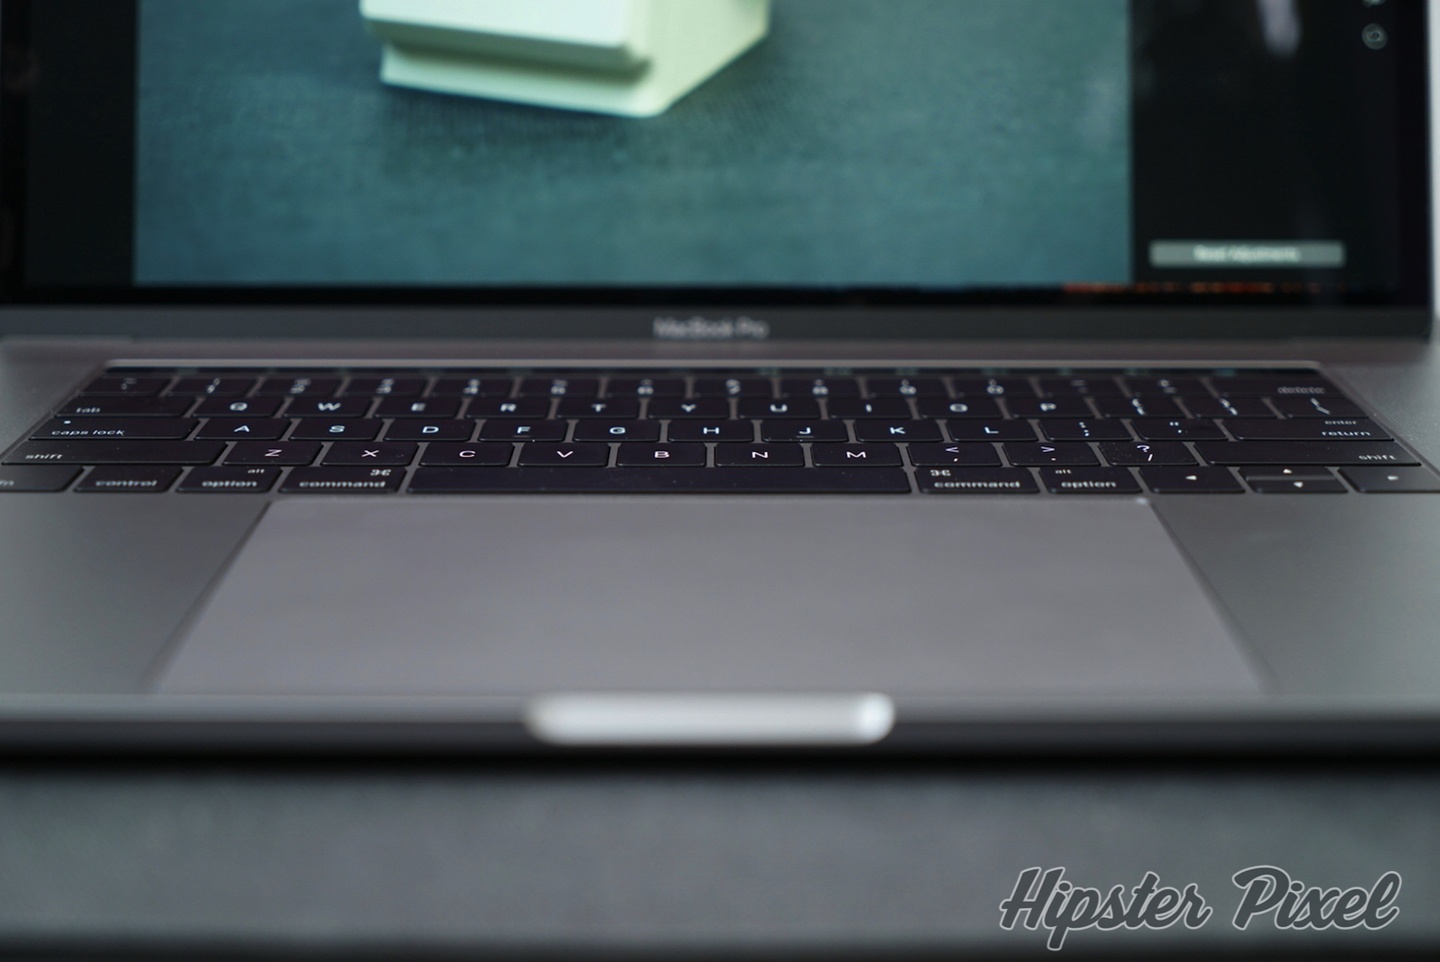 MacBook Pro from the front